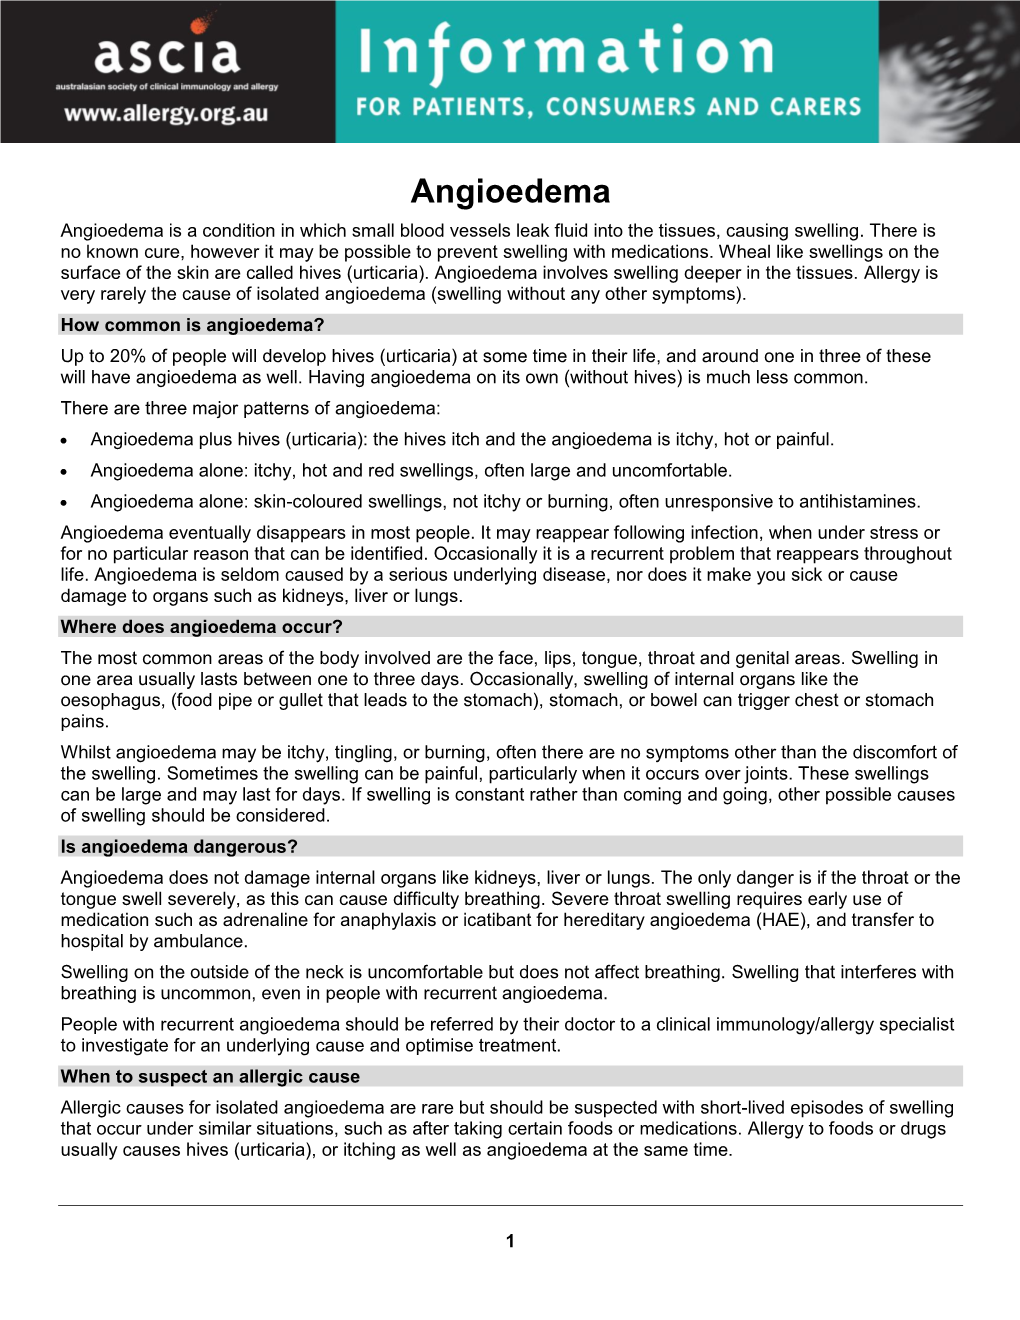 Angioedema Angioedema Is a Condition in Which Small Blood Vessels Leak Fluid Into the Tissues, Causing Swelling